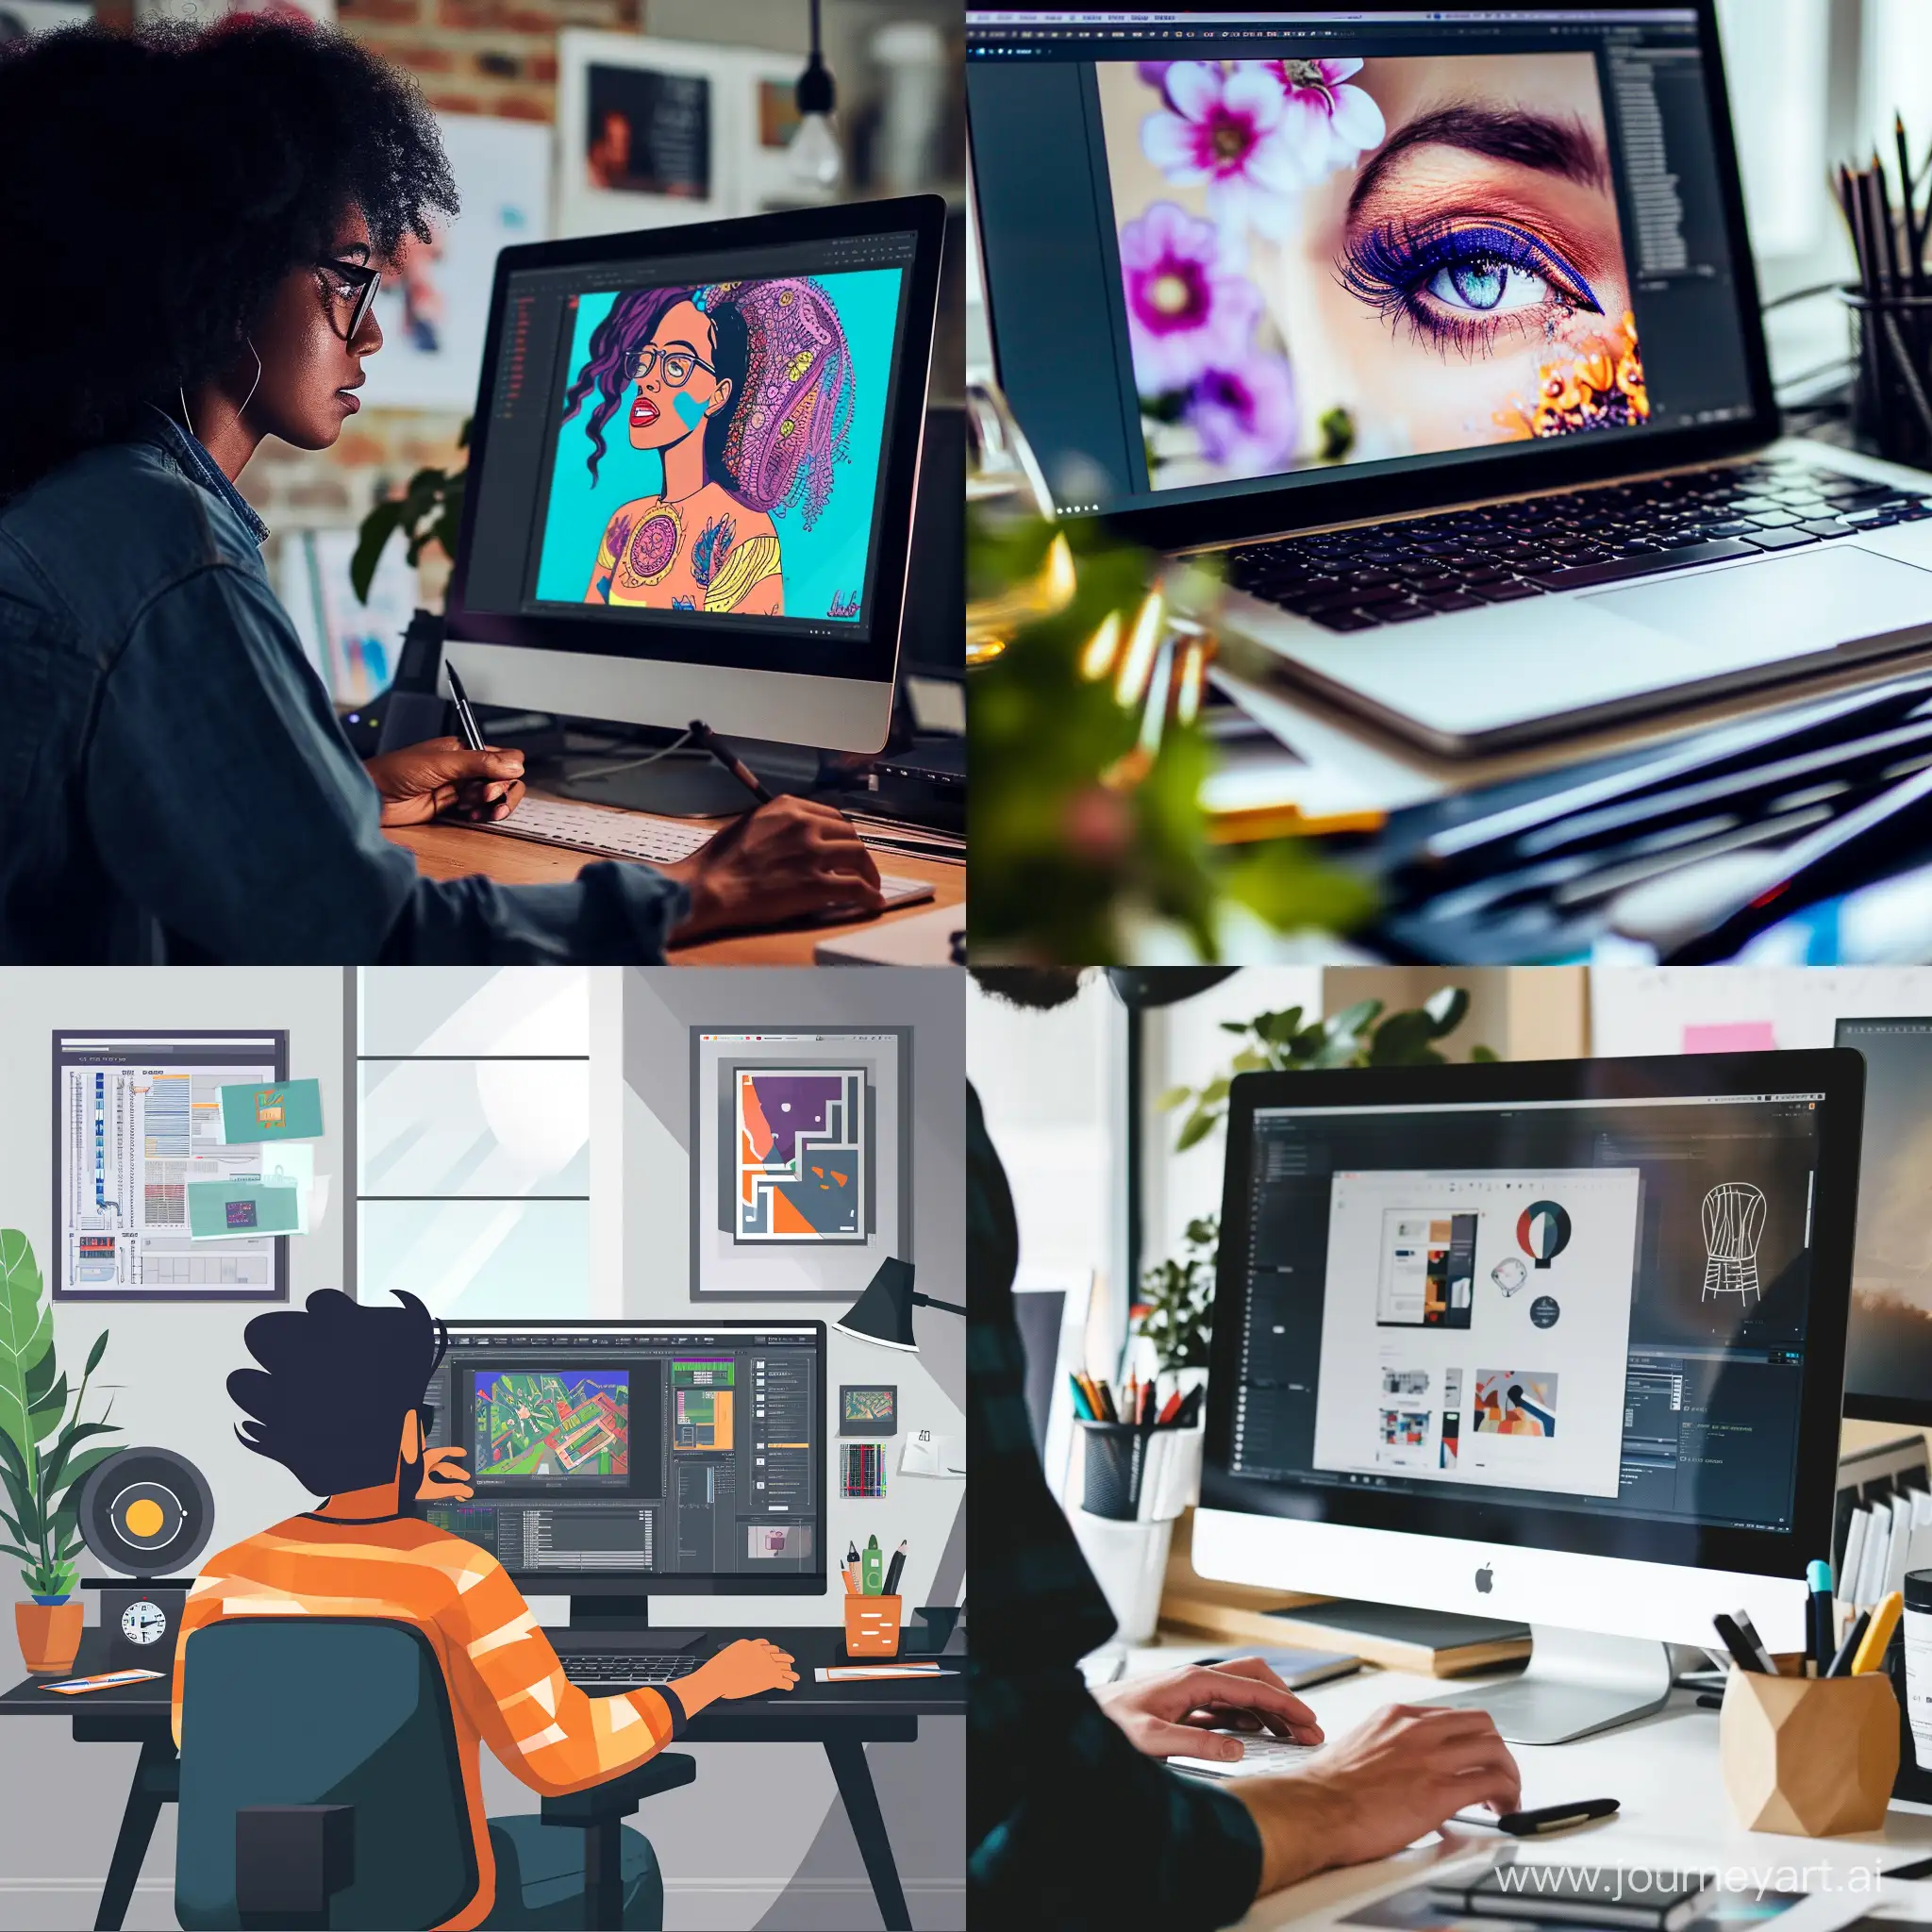 do any graphic design job in photoshop, illustrator, indesign